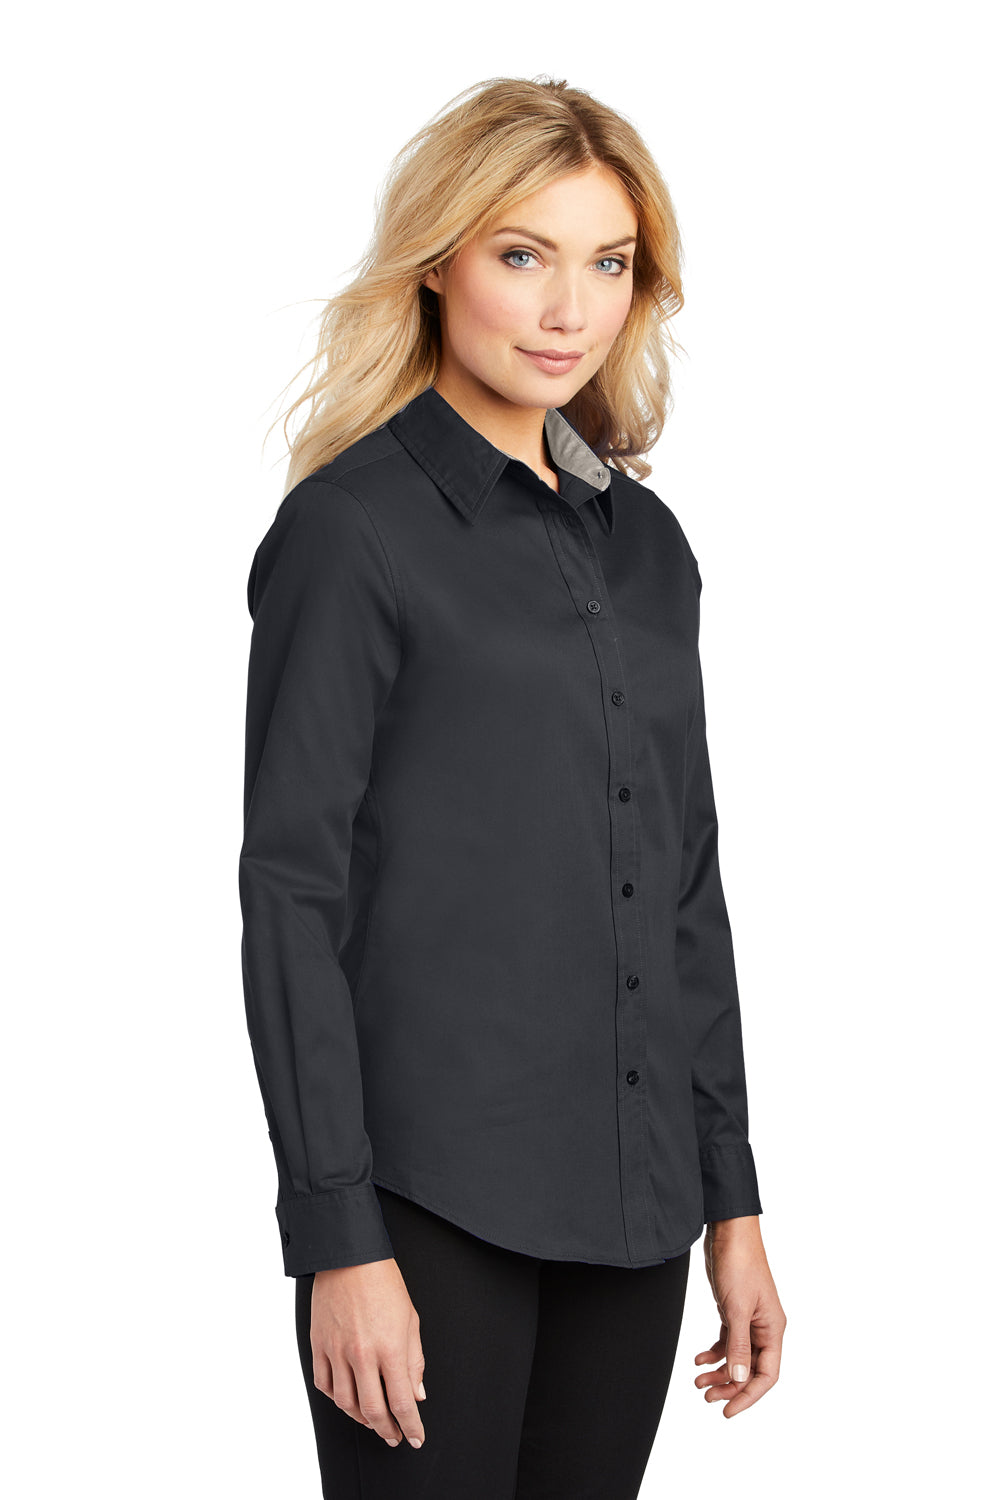 Port Authority L608 Womens Easy Care Wrinkle Resistant Long Sleeve Button Down Shirt Classic Navy Blue 3Q